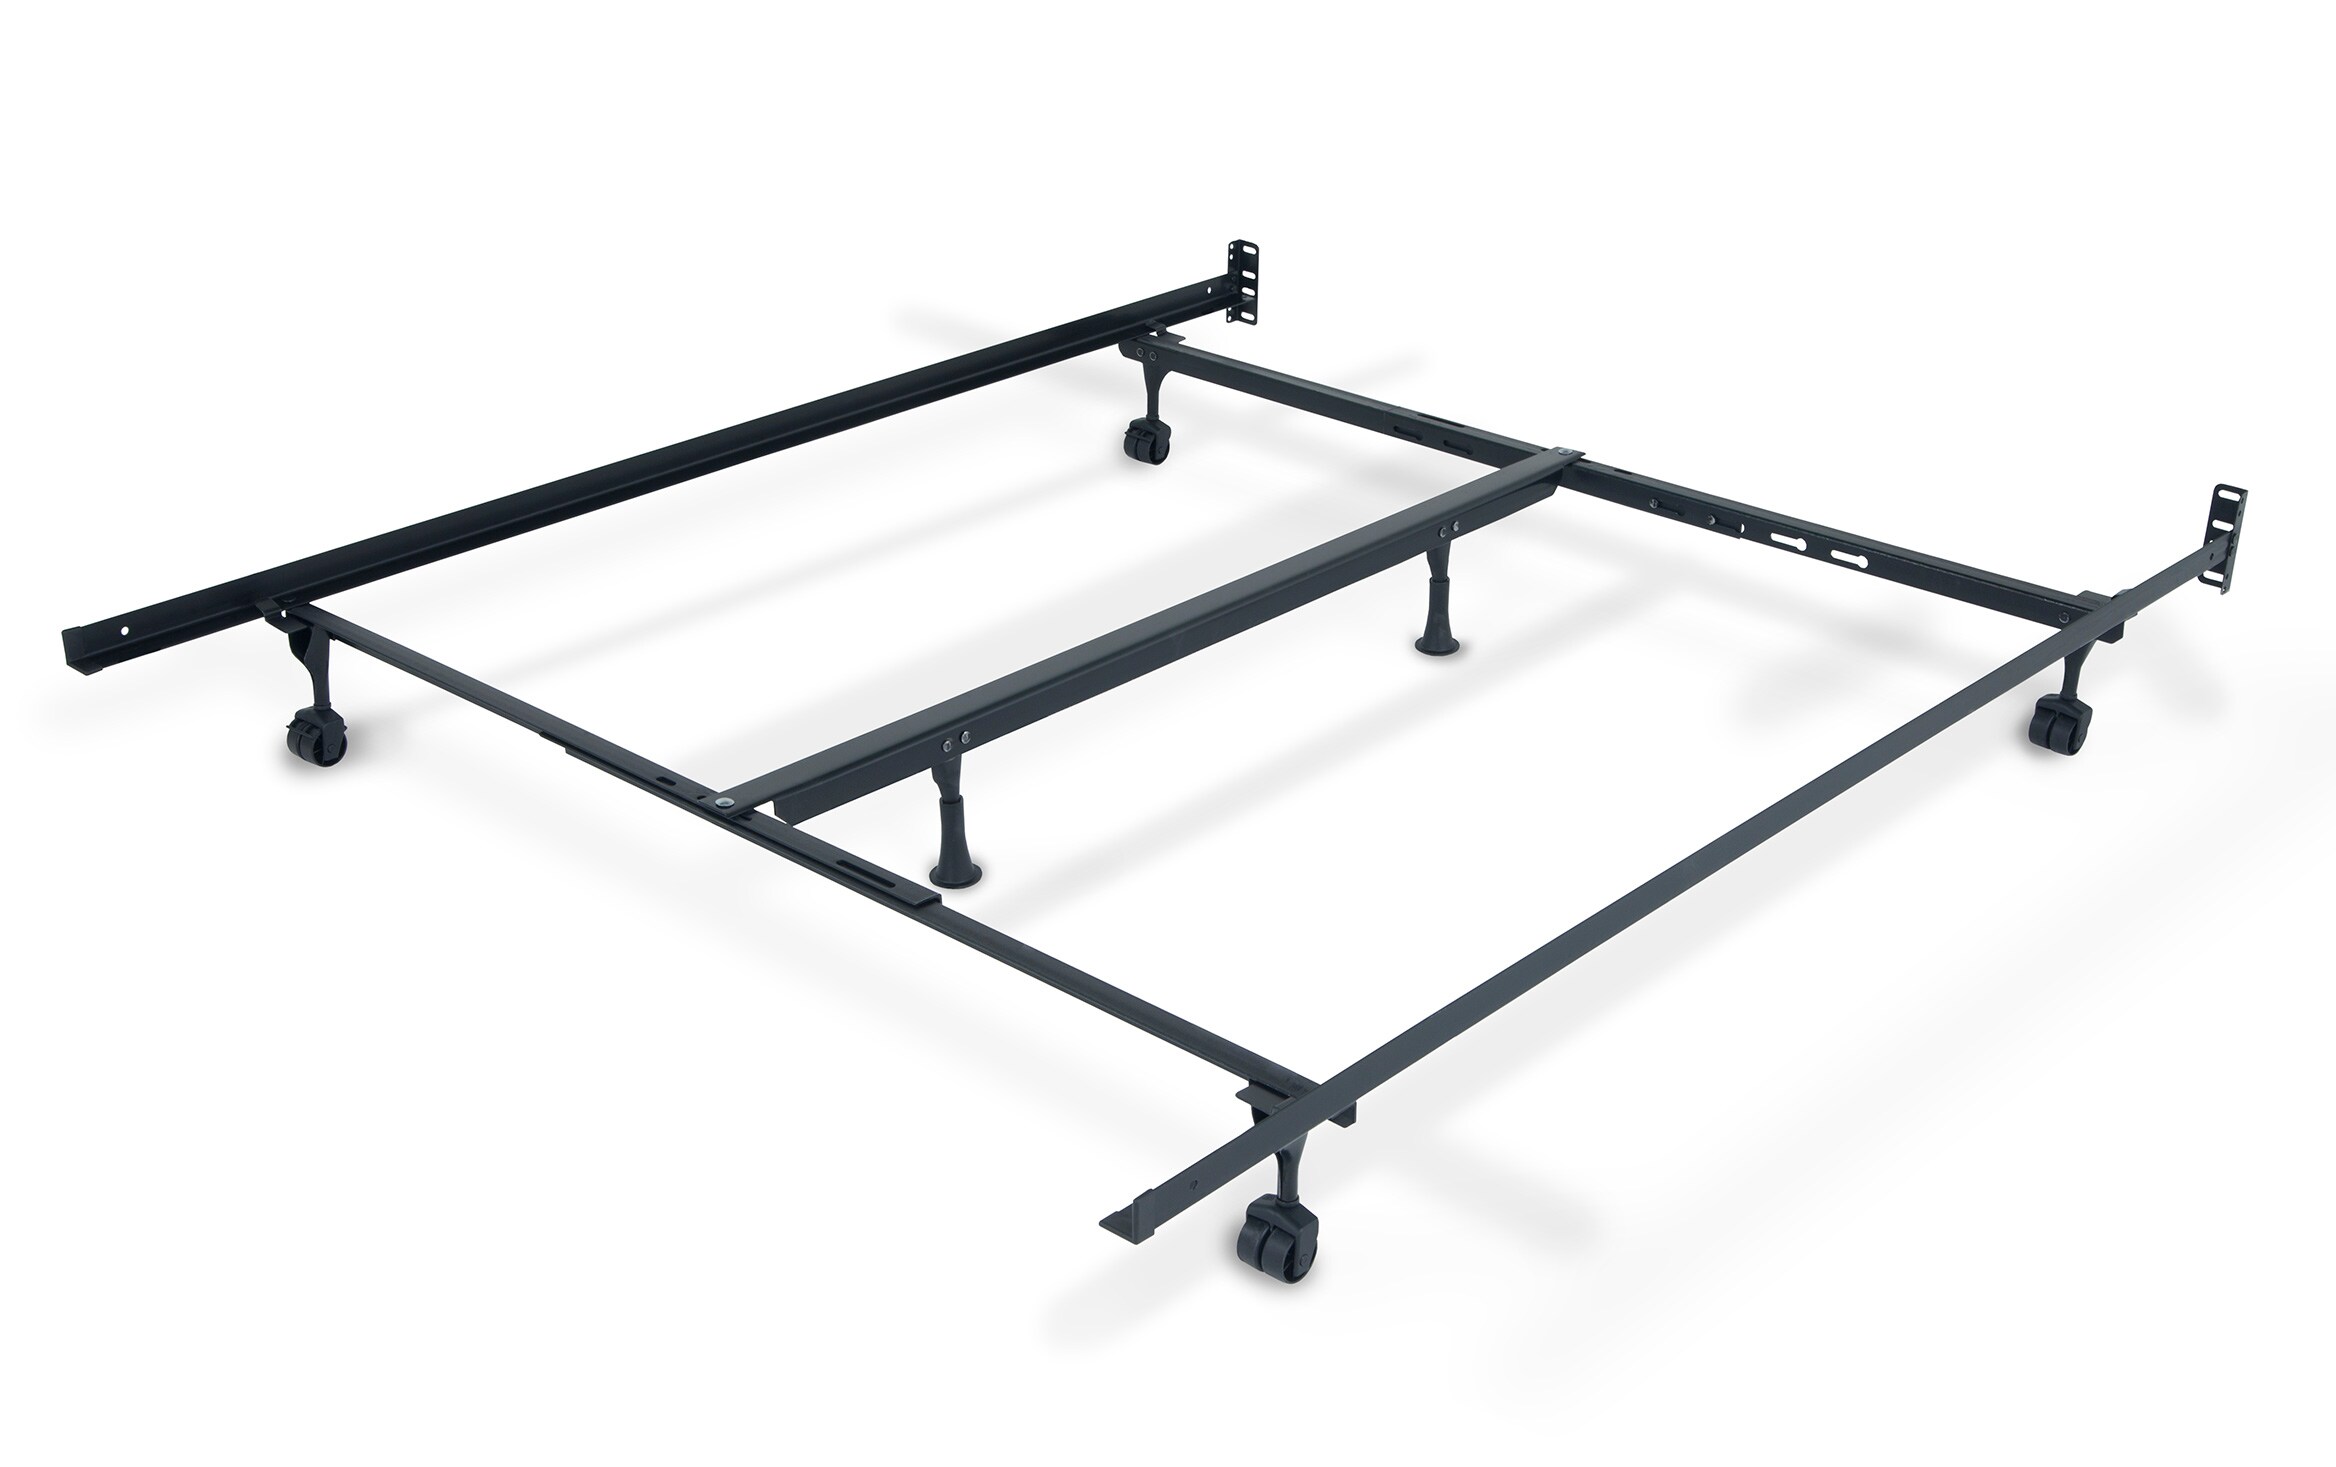 Queen King Bed Frame With Casters Bob, King Size Bed Frame Deals